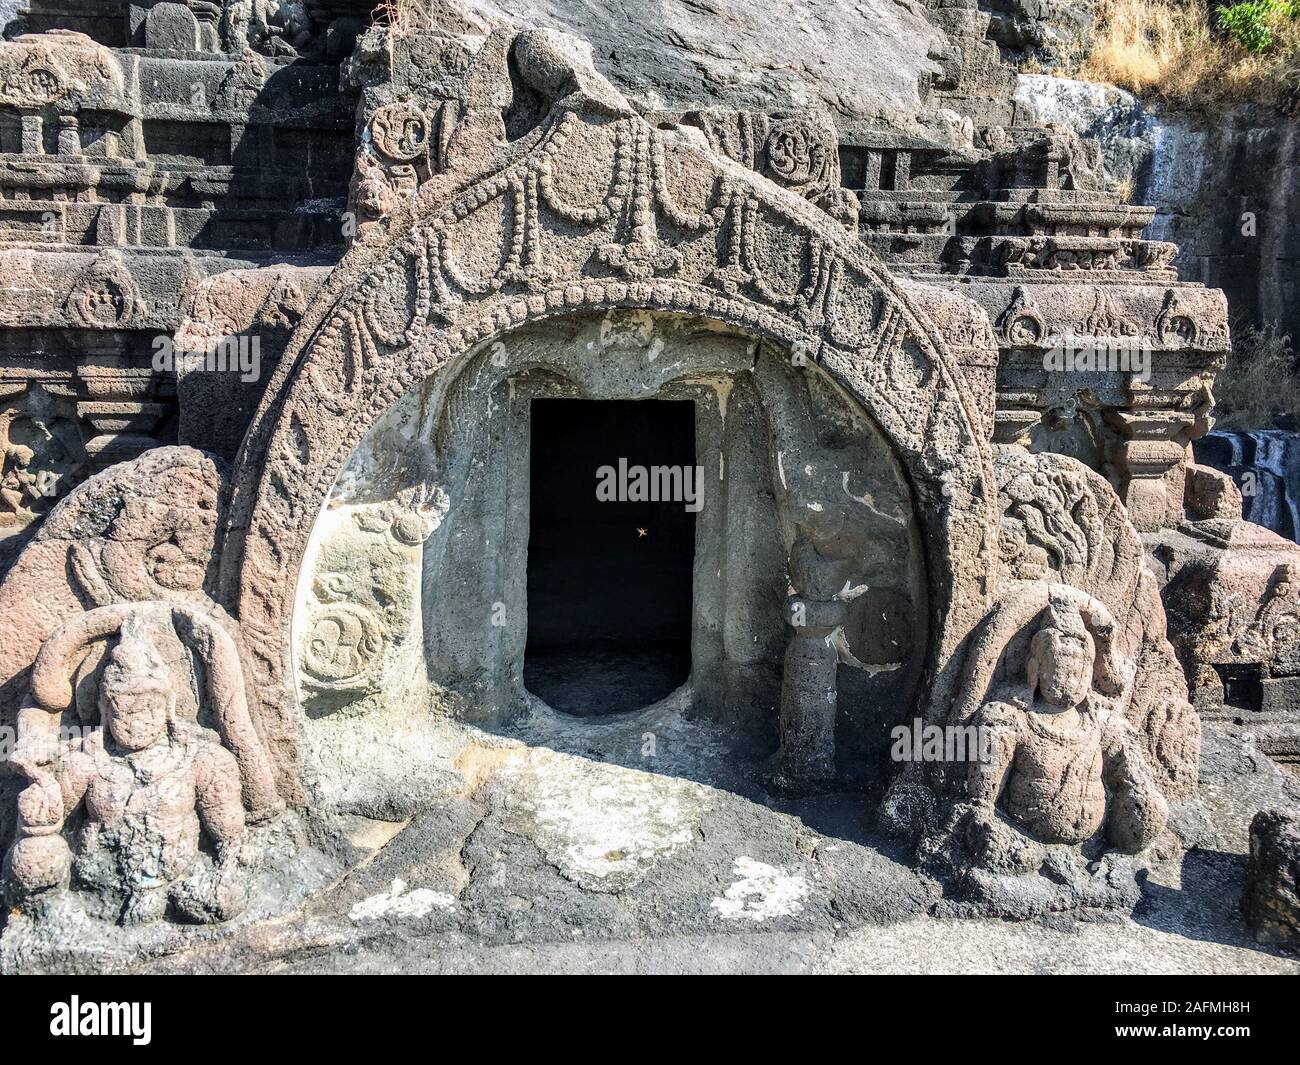 Ajanta Caves are 30 rock-cut Buddhist cave monuments from the 2nd century BCE to about 480 CE in the Aurangabad district of Maharashtra state of India. Stock Photo